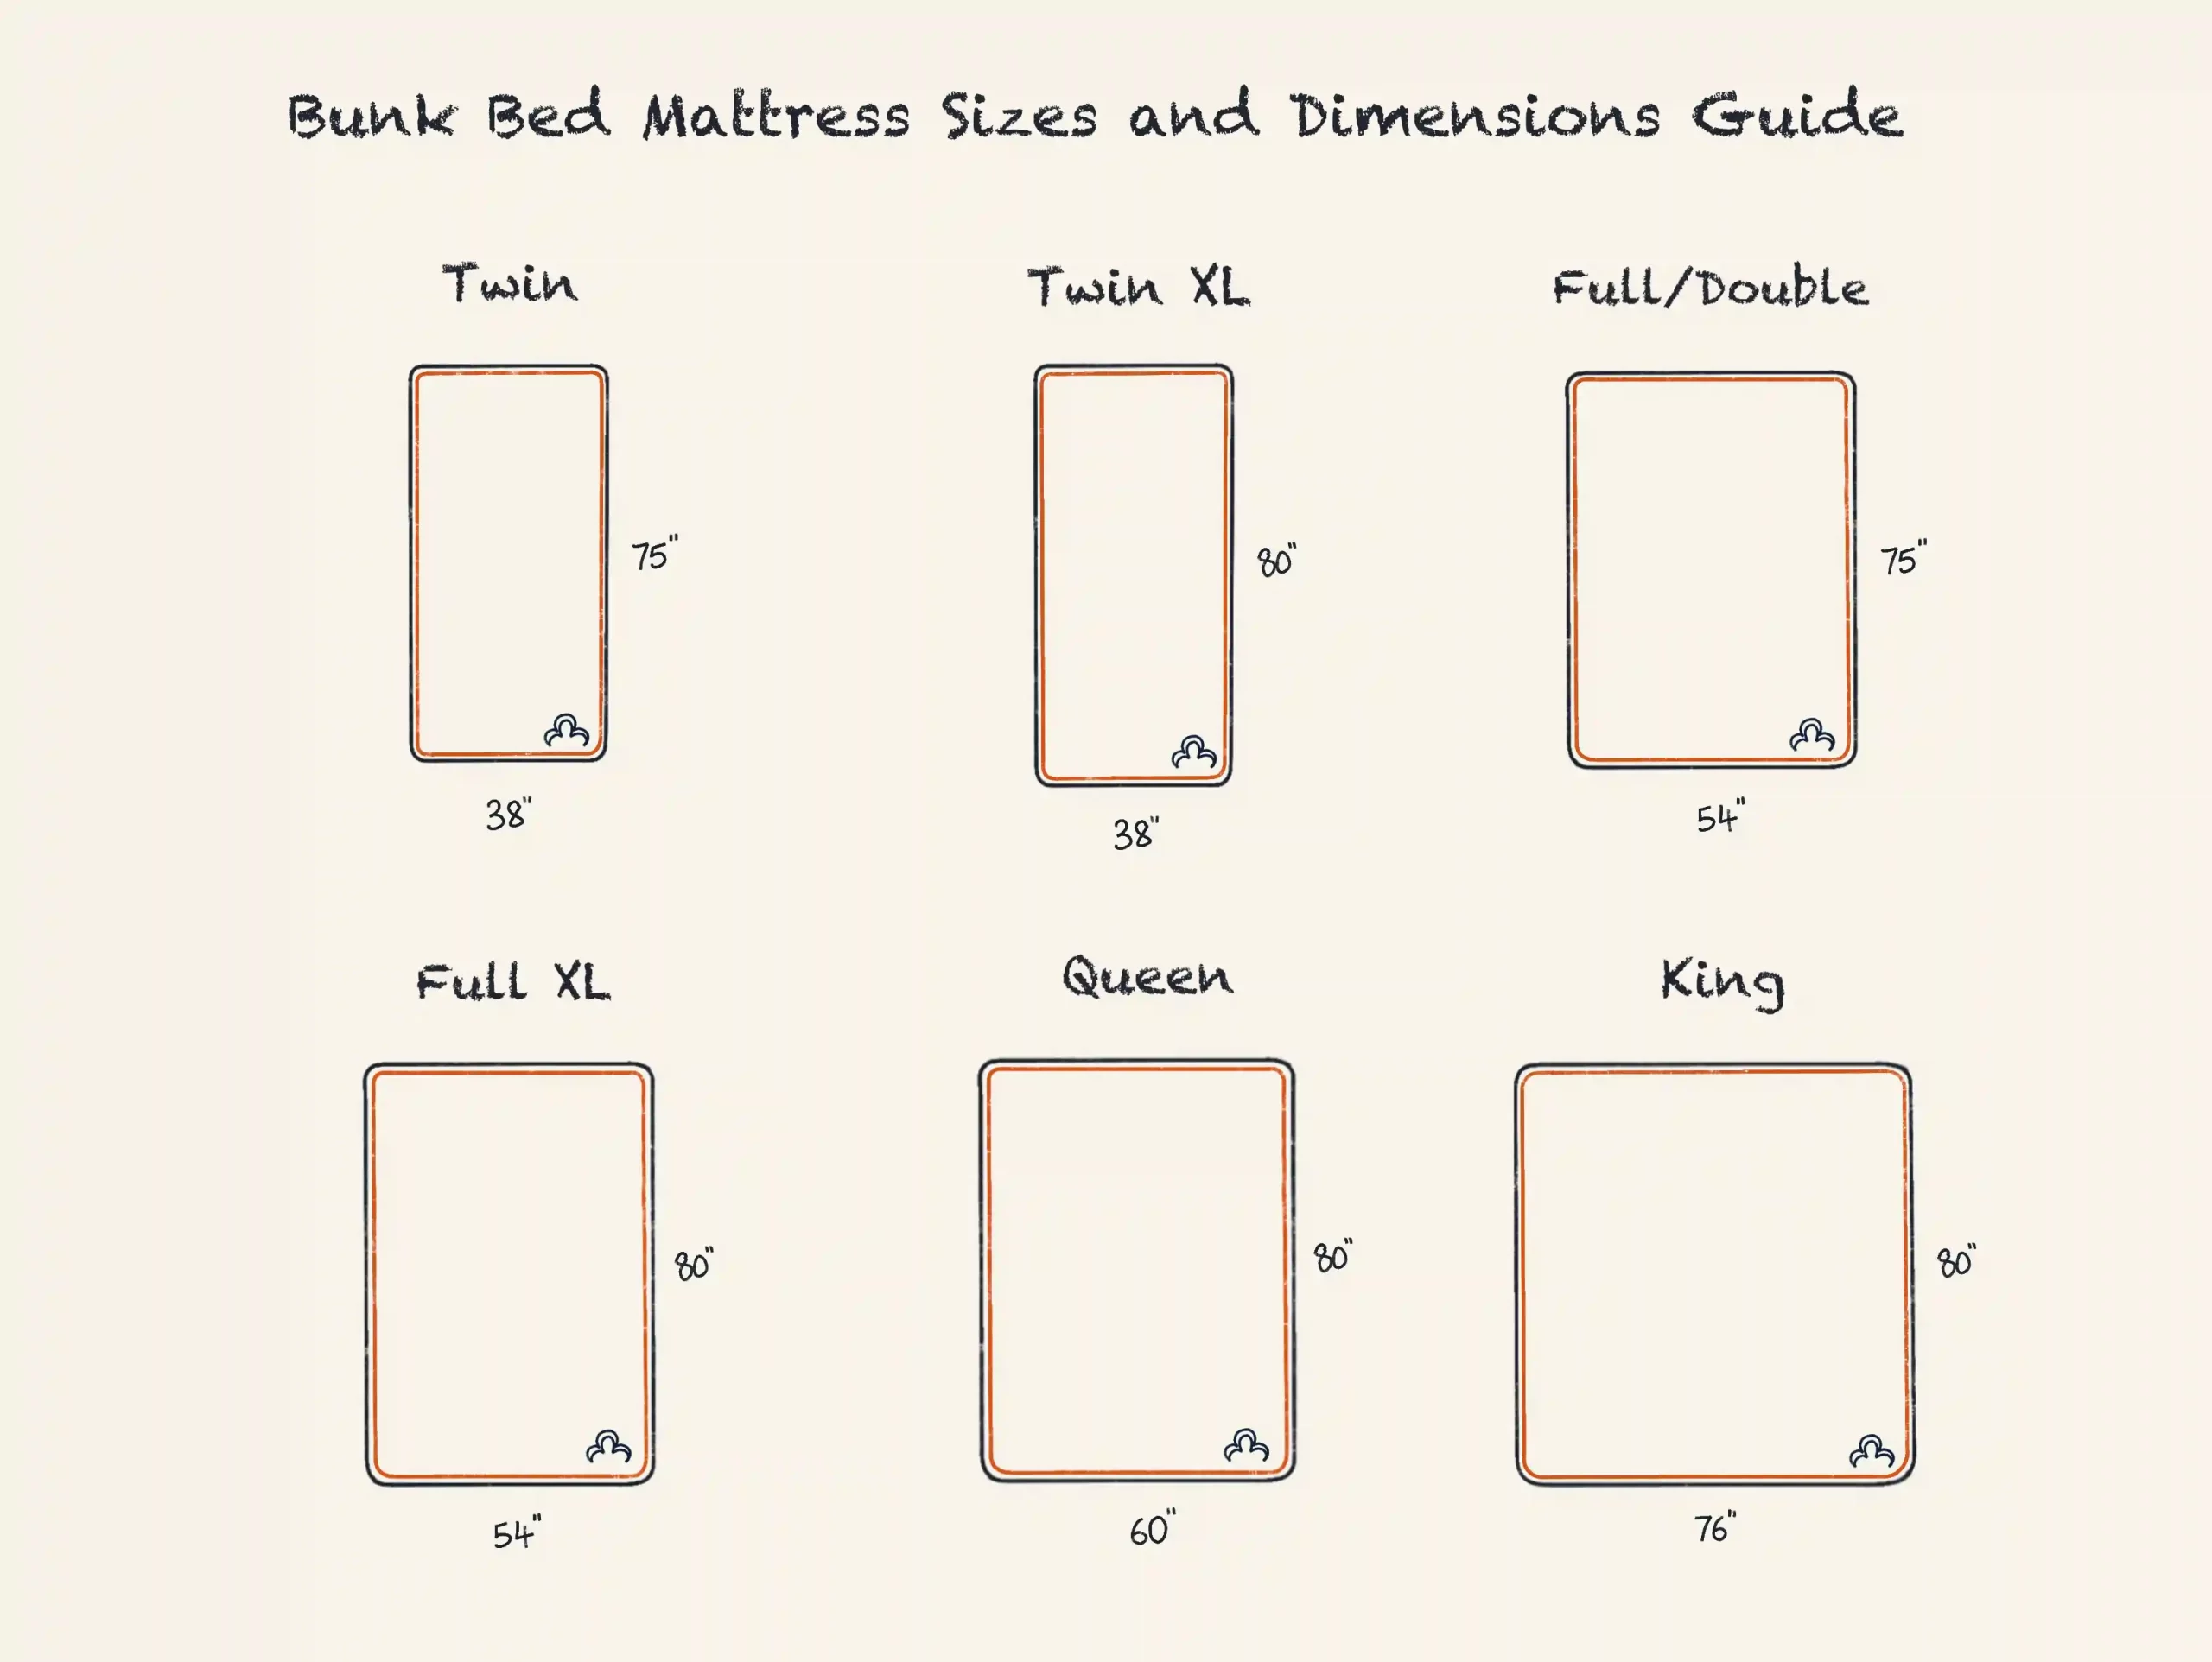 Illustration of Bunk Bed Mattress Sizes and Dimensions Guide